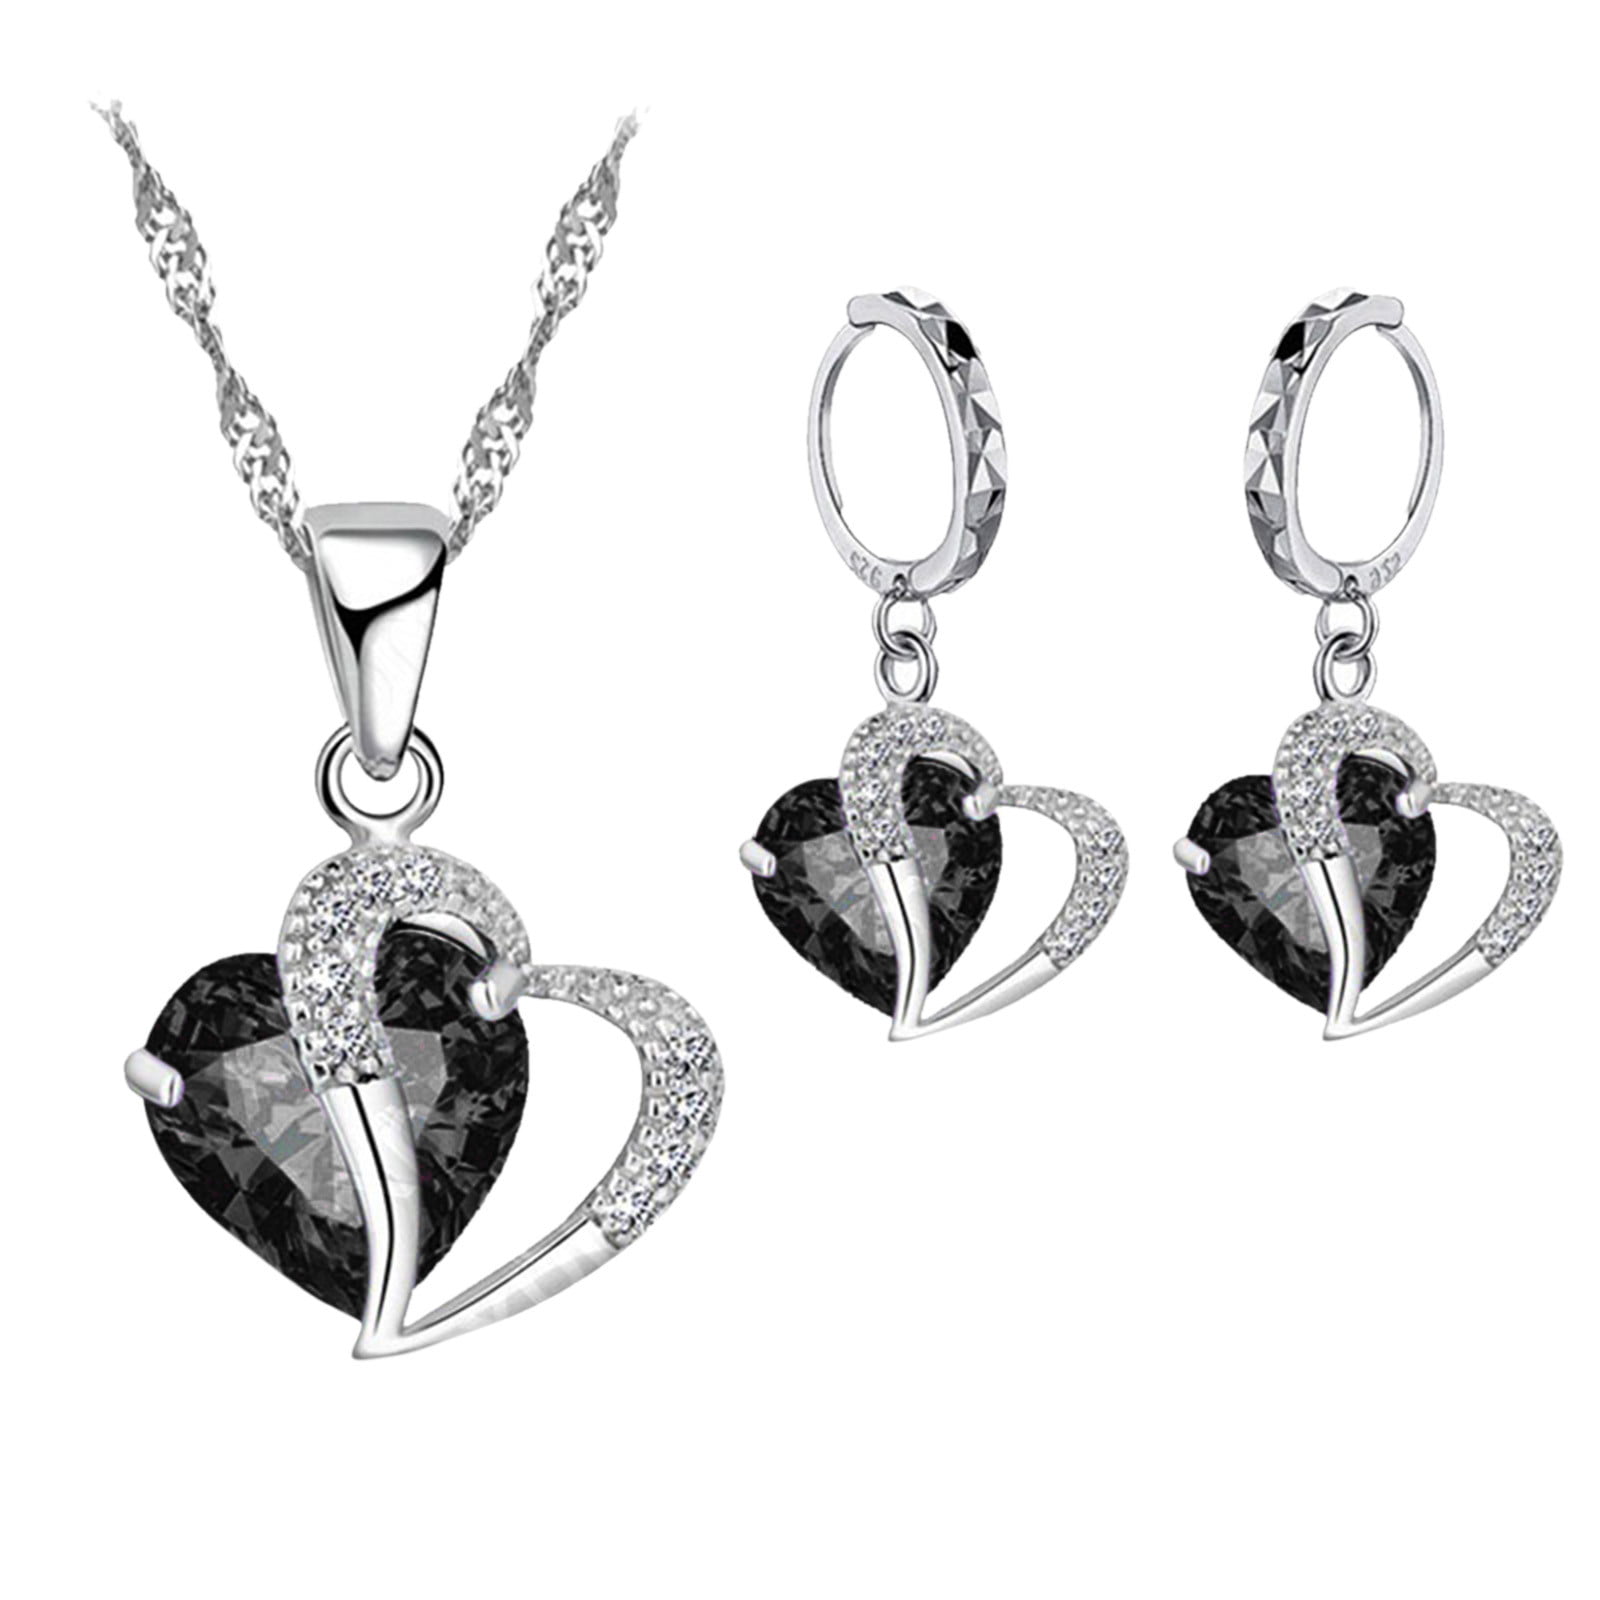 Details about   January Birthstone SET Jewelry 925 Silver CAB GARNET Matching Earrings Pendant 